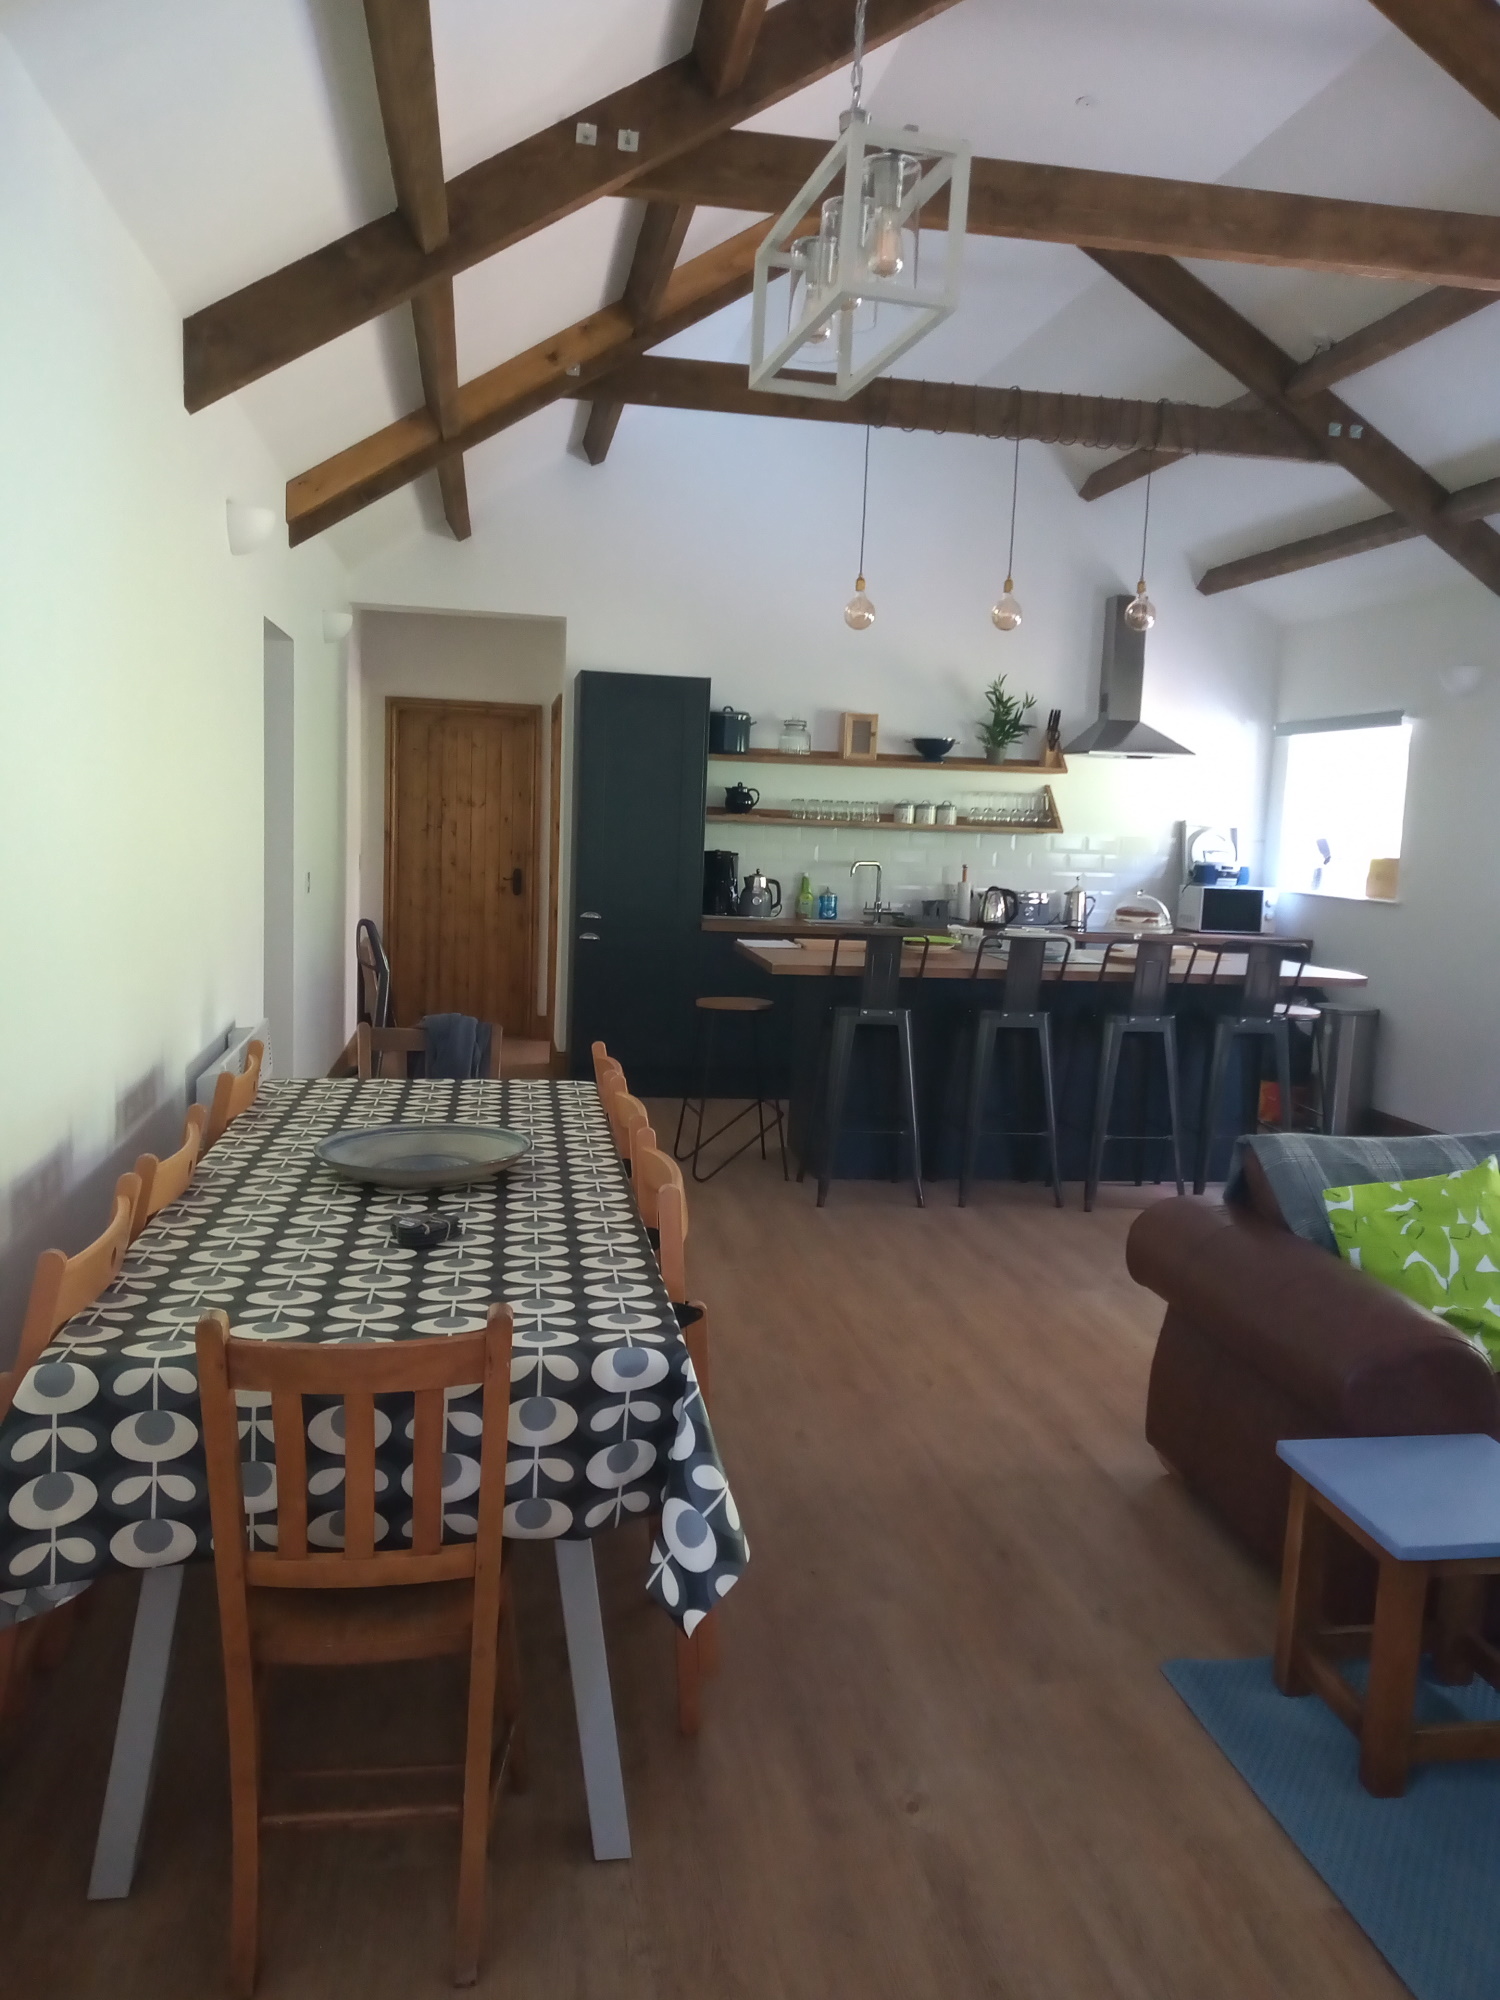 Vineyard Barns Gower - Dairy inside dining for 10 guests